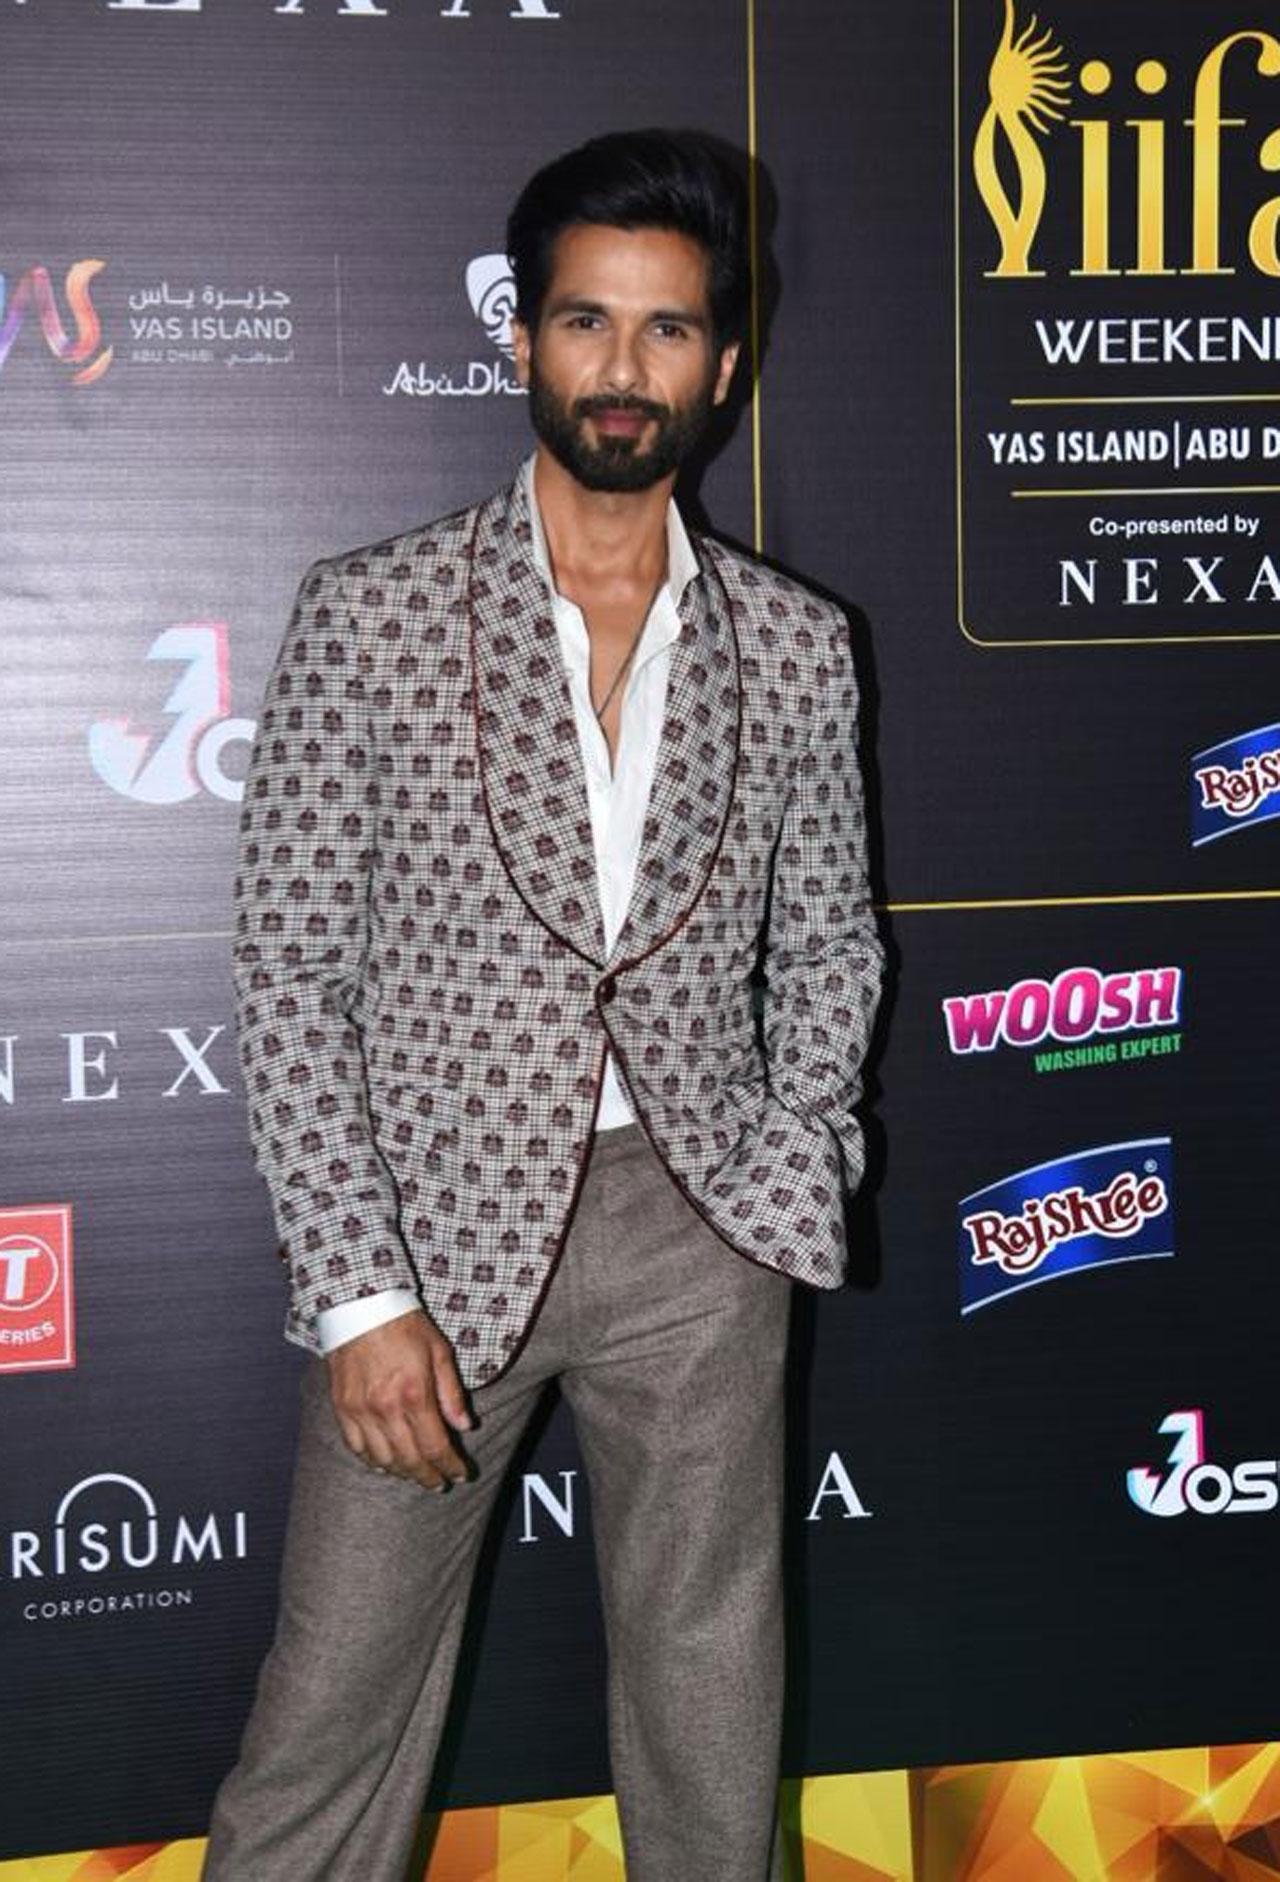 Shahid Kapoor has always nailed his outings with his looks and outfits and the green carpet appearance is no exception. The handsome star is all set to pay tribute to the disco king Bappi Lahri by dancing on some of his most iconic songs at the main event of IIFA 2022. Shahid Kapoor was last seen in 'Jersey'